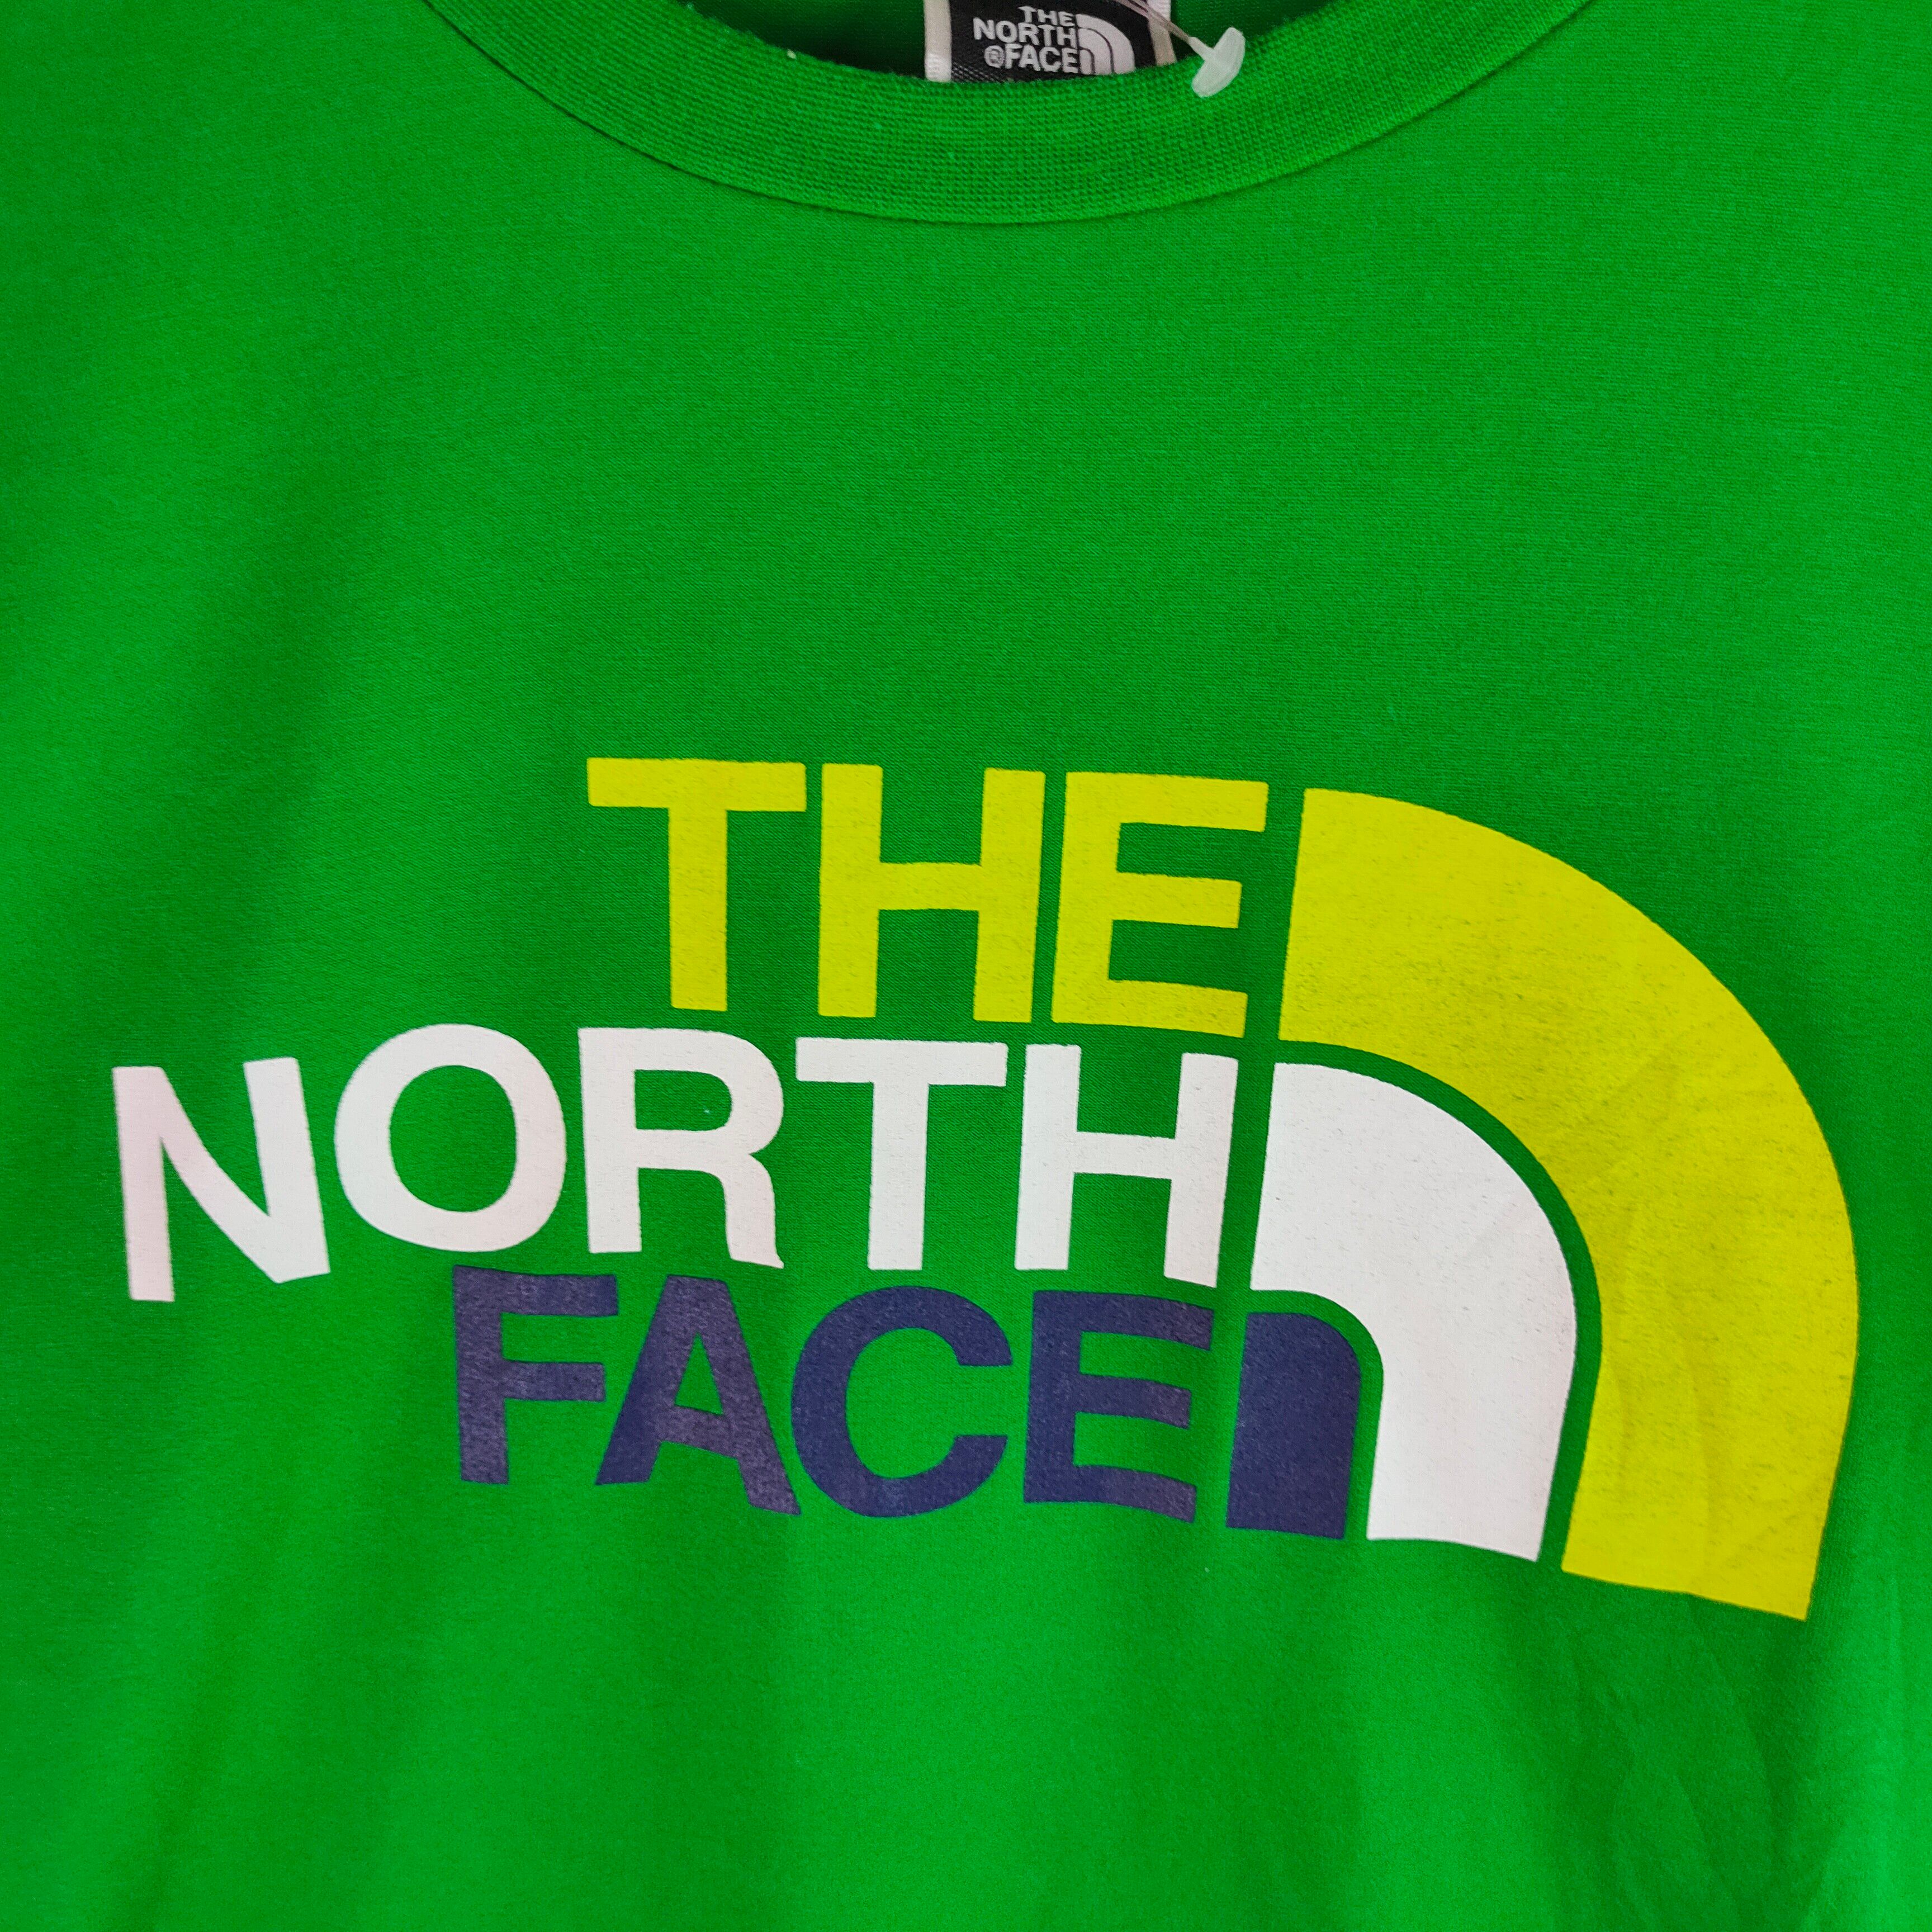 THE NORTH FACE Quick Dry Big Logo Colourful Shirt - 2